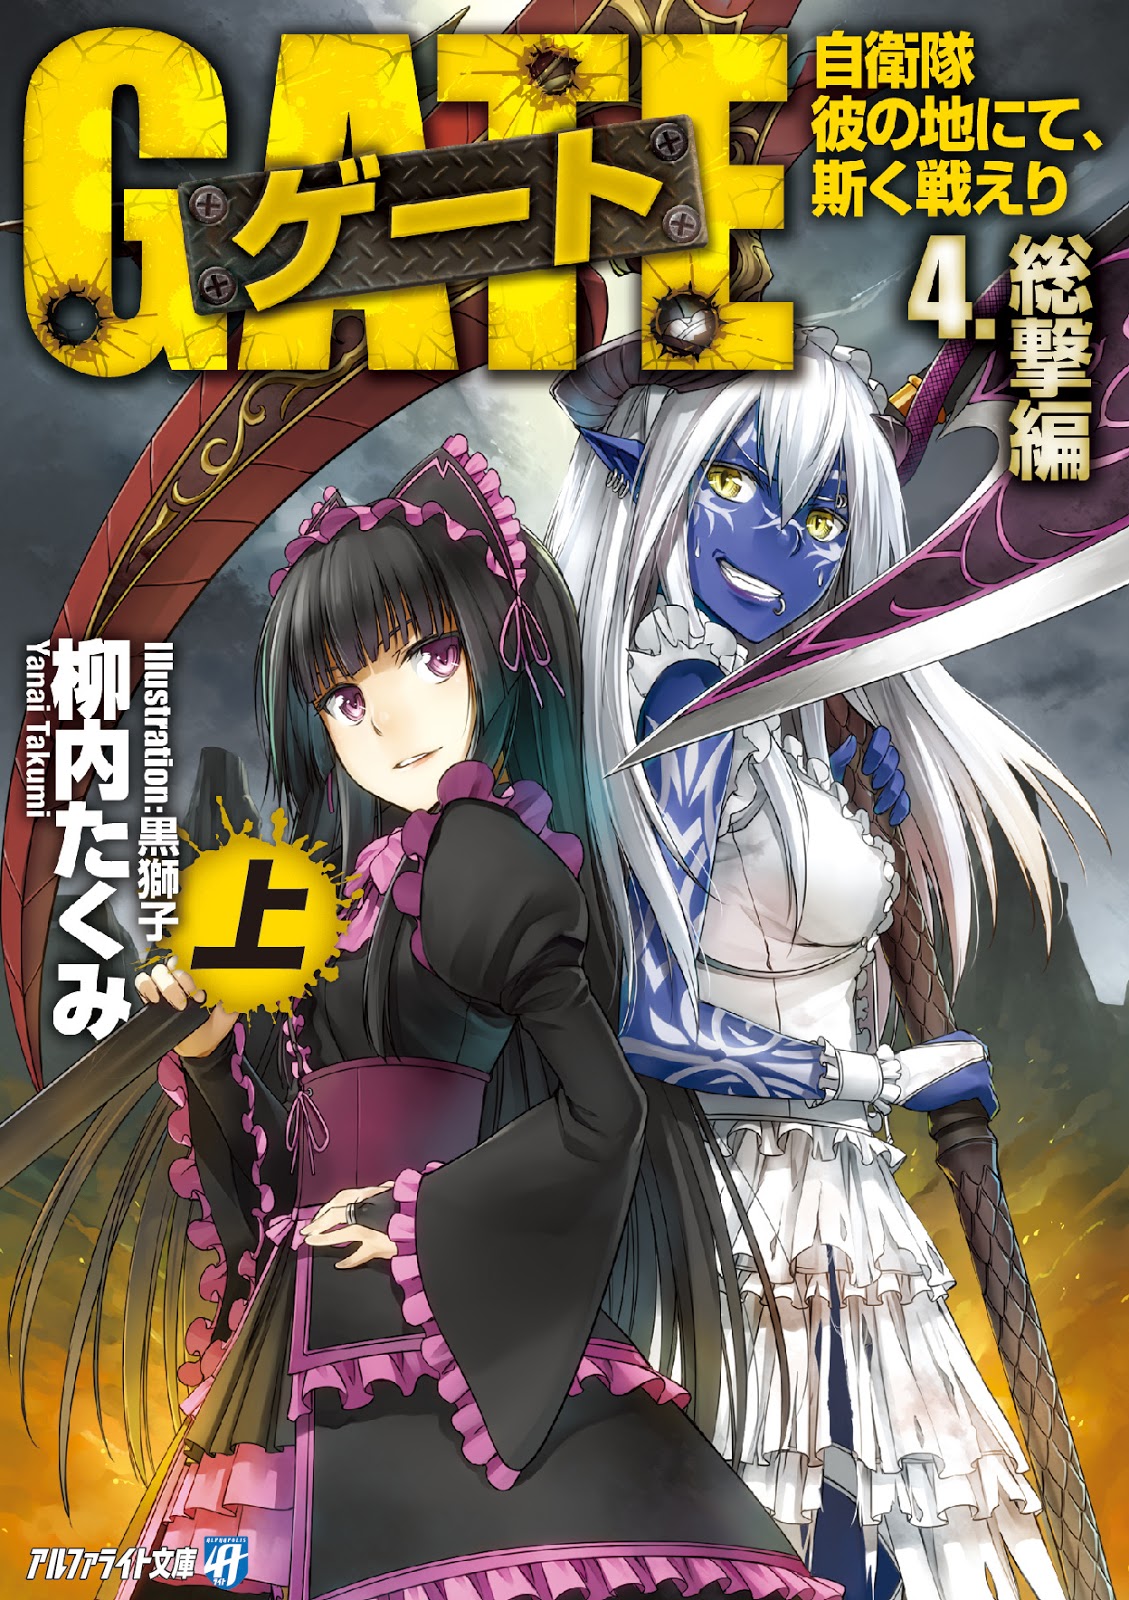 Light Novel Paperback Size 3 Top) Gate SEASON2 The Self-Defense Forces in  his sea and fight like this. The heated running edition (paperback edition)  / Takumi Yanagiuchi Alpha Light Library, Book